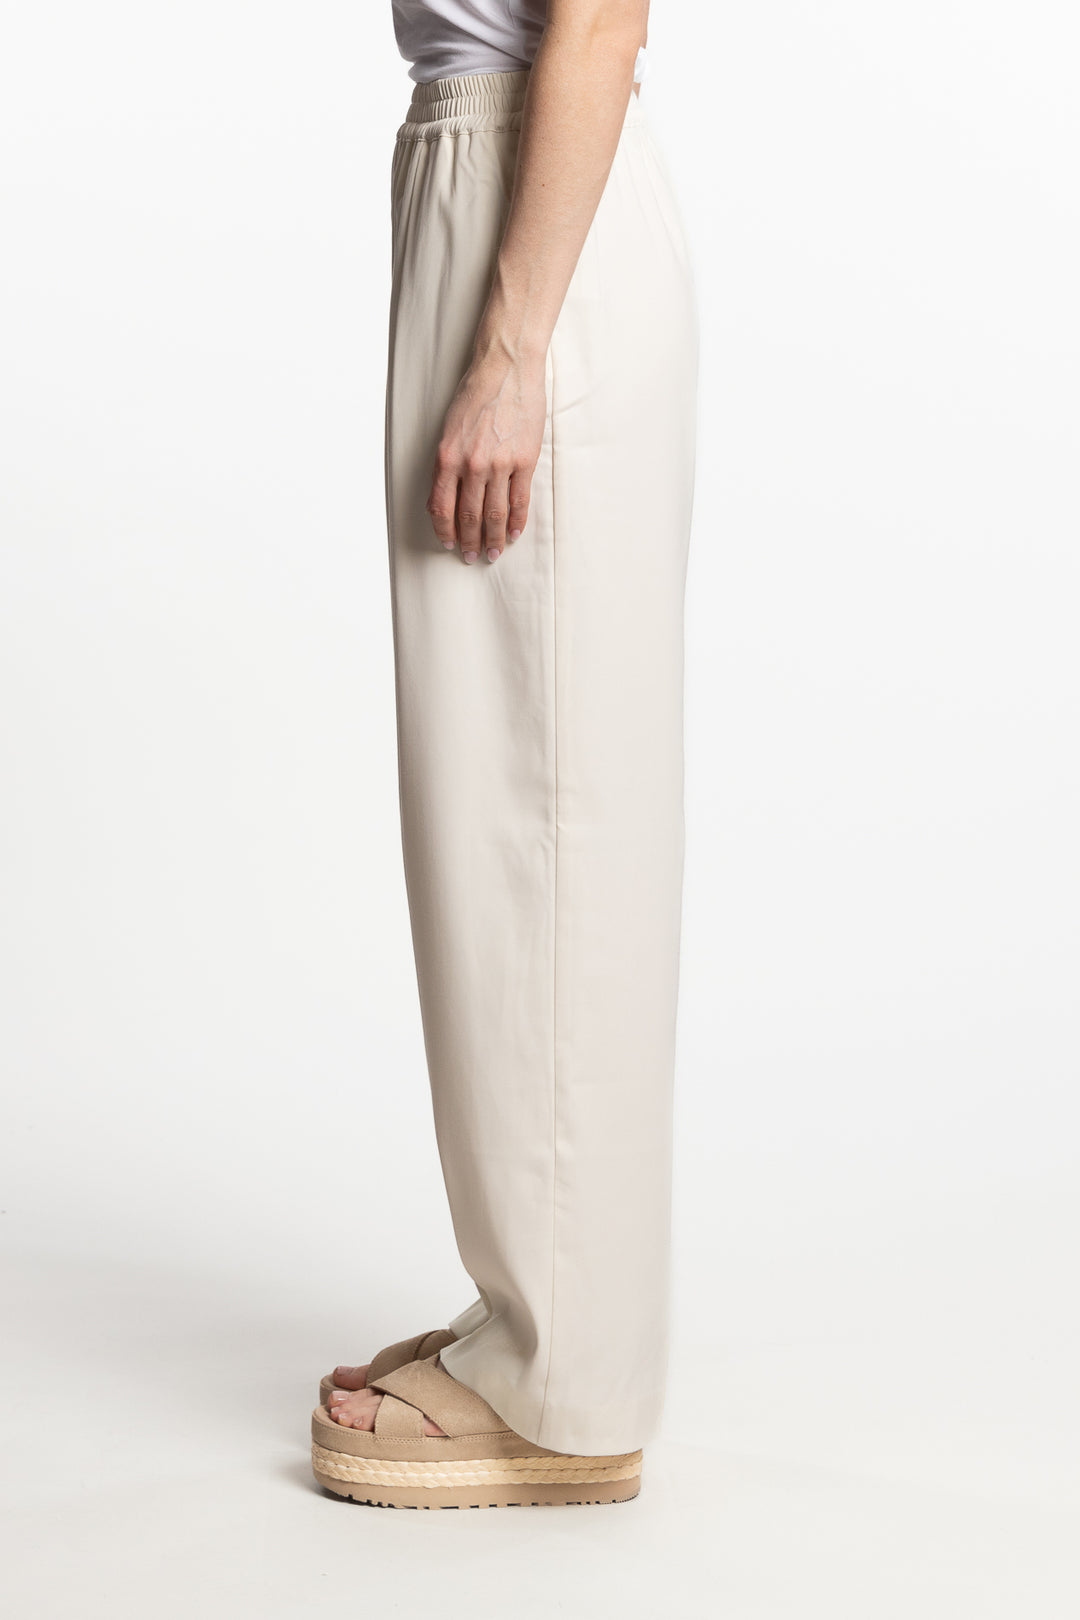 Julia Trousers 14635- Solitary Star